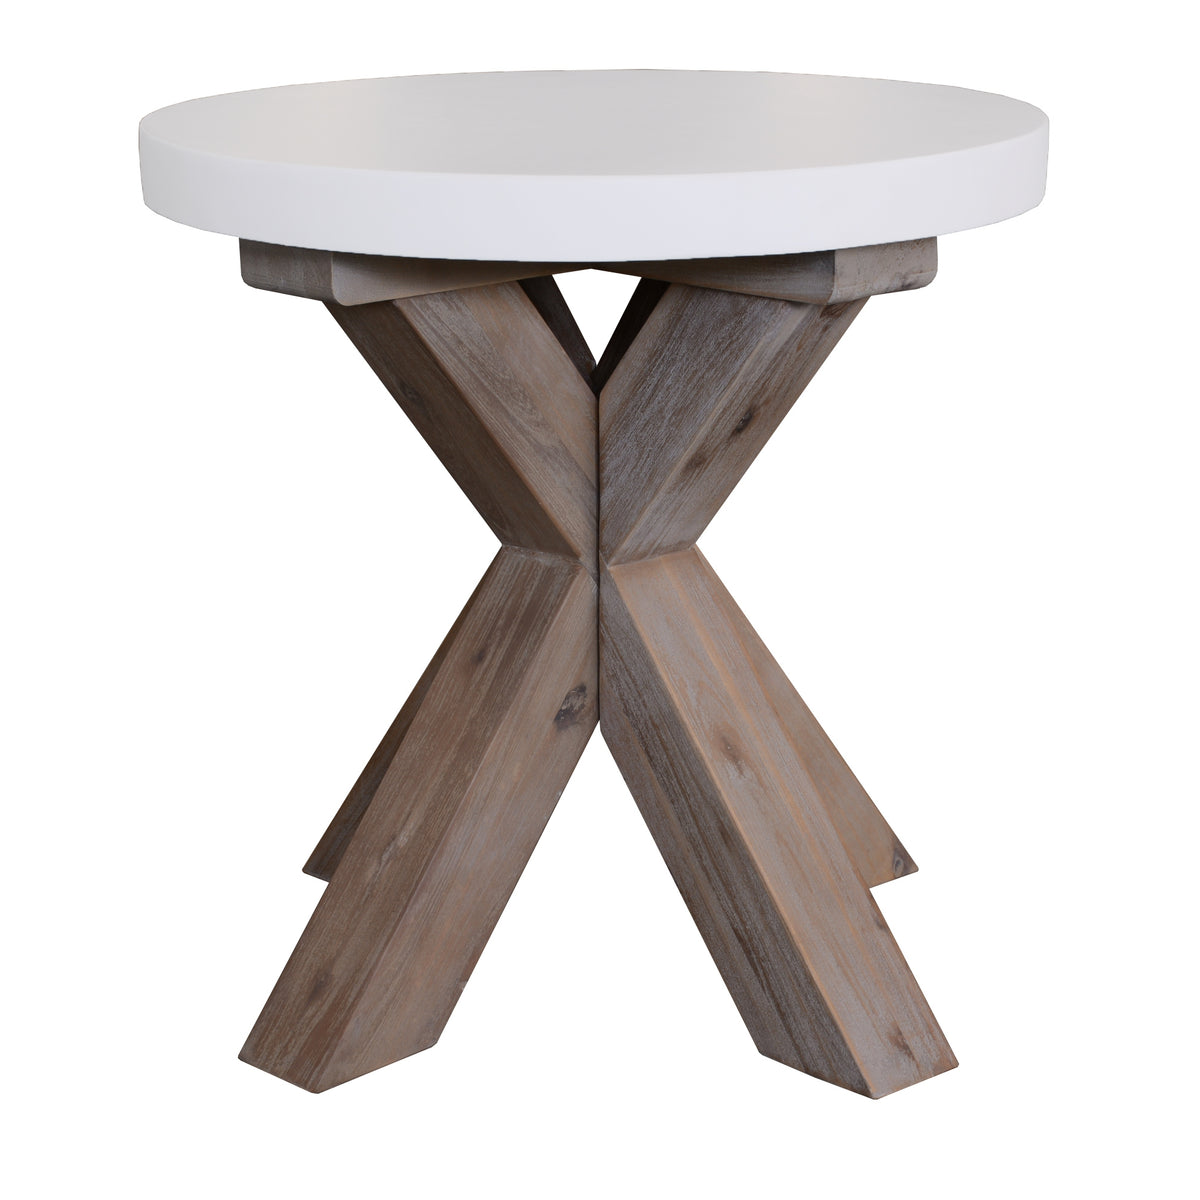 Stony Lamp Table with Concrete Top White 50cm - Round